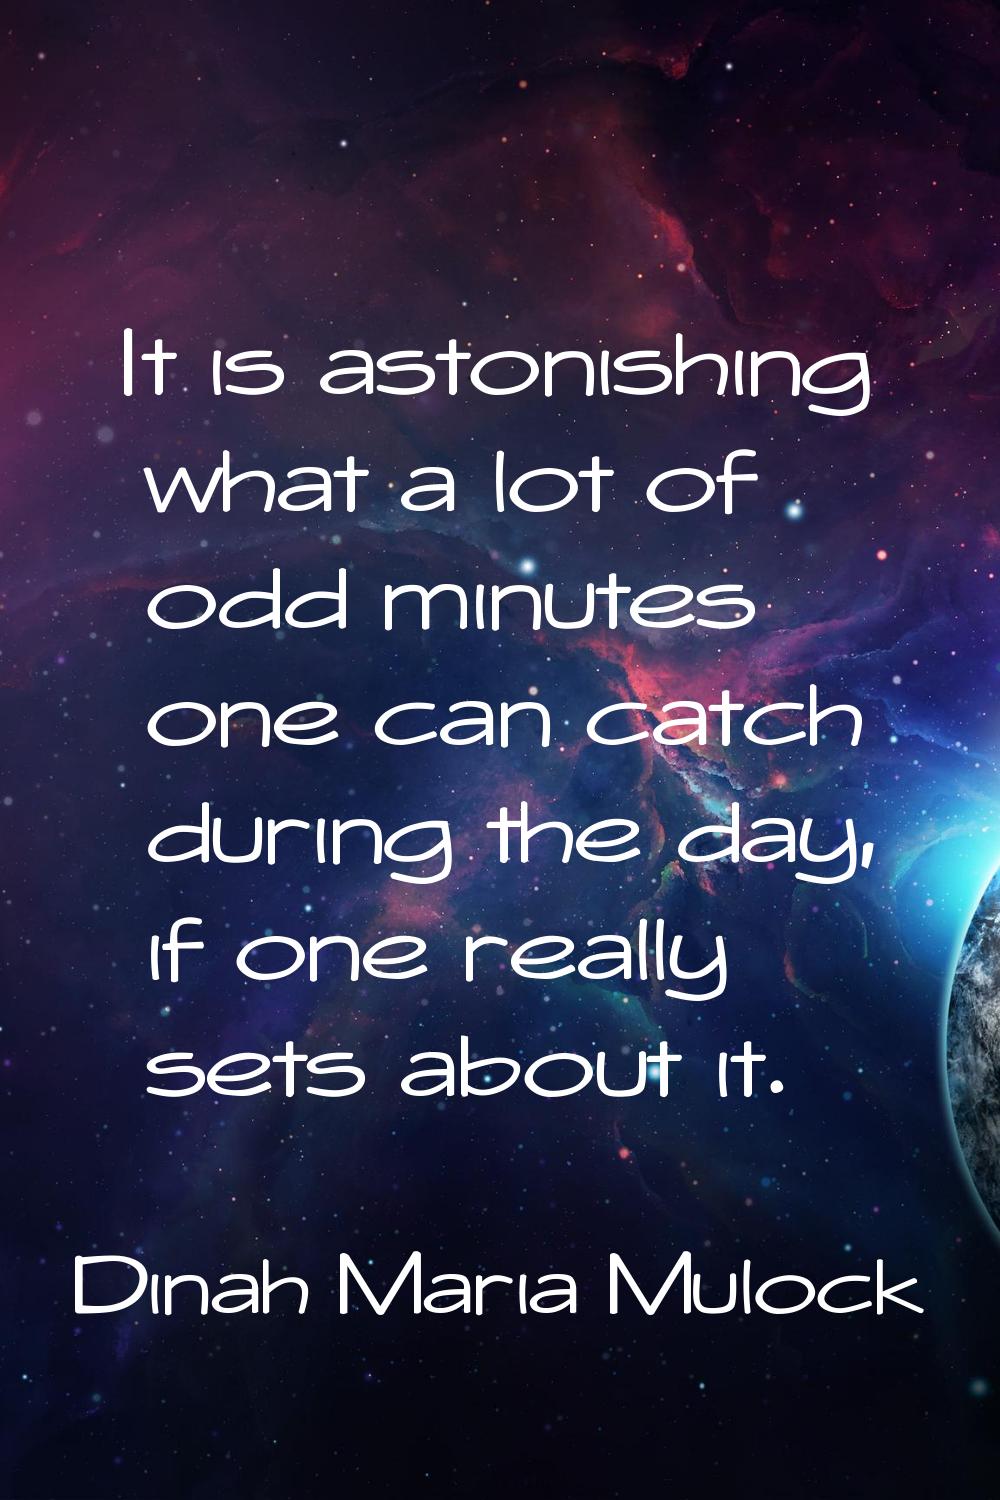 It is astonishing what a lot of odd minutes one can catch during the day, if one really sets about 